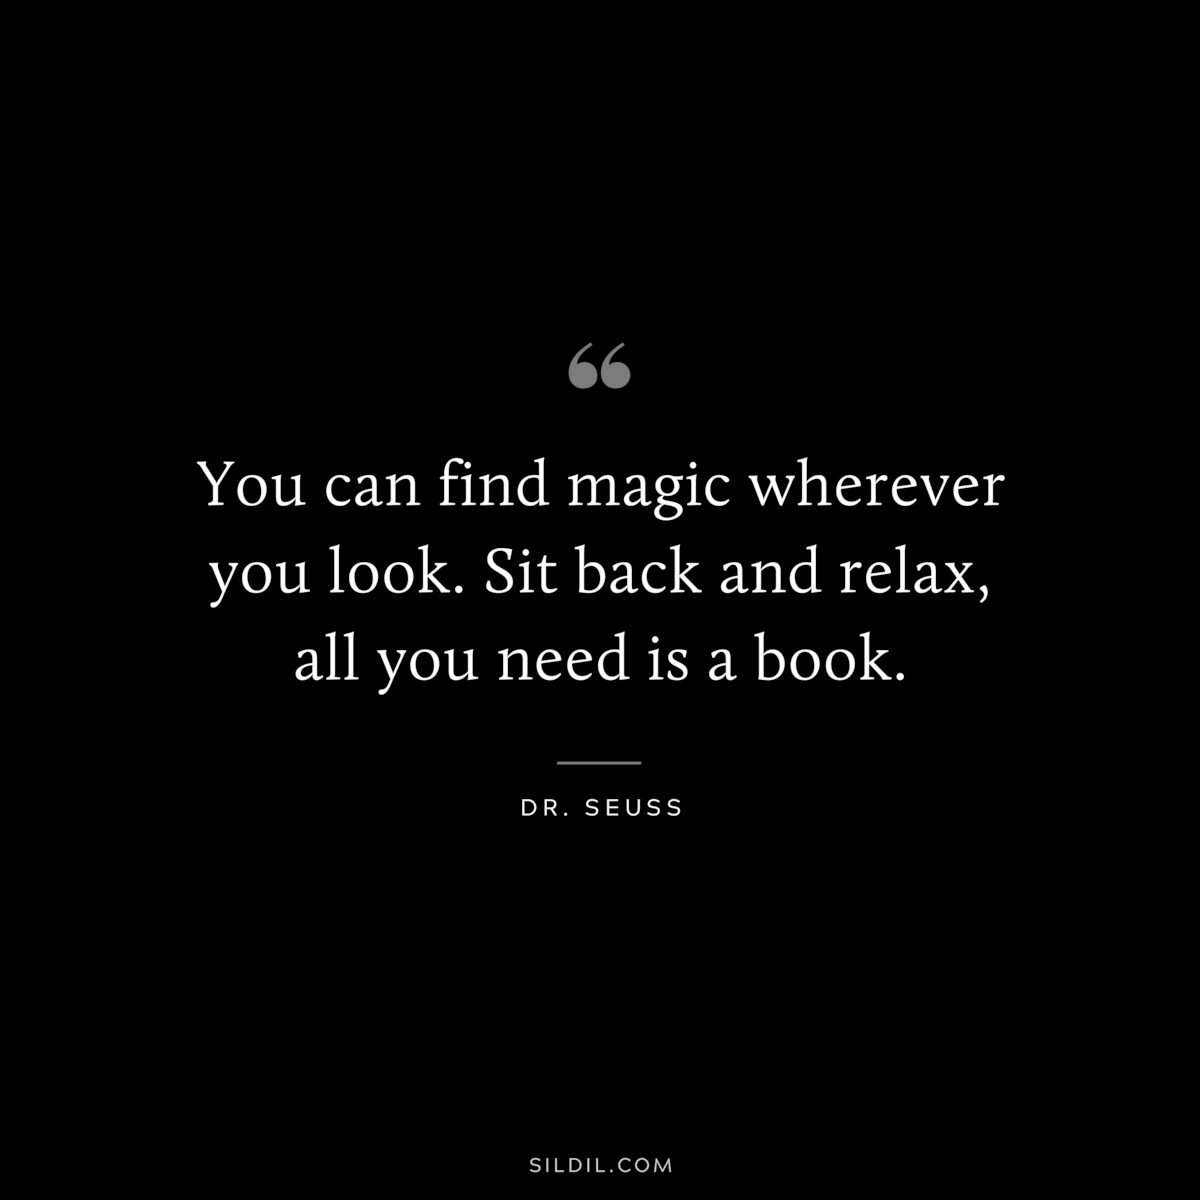 You can find magic wherever you look. Sit back and relax, all you need is a book. ― Dr. Seuss